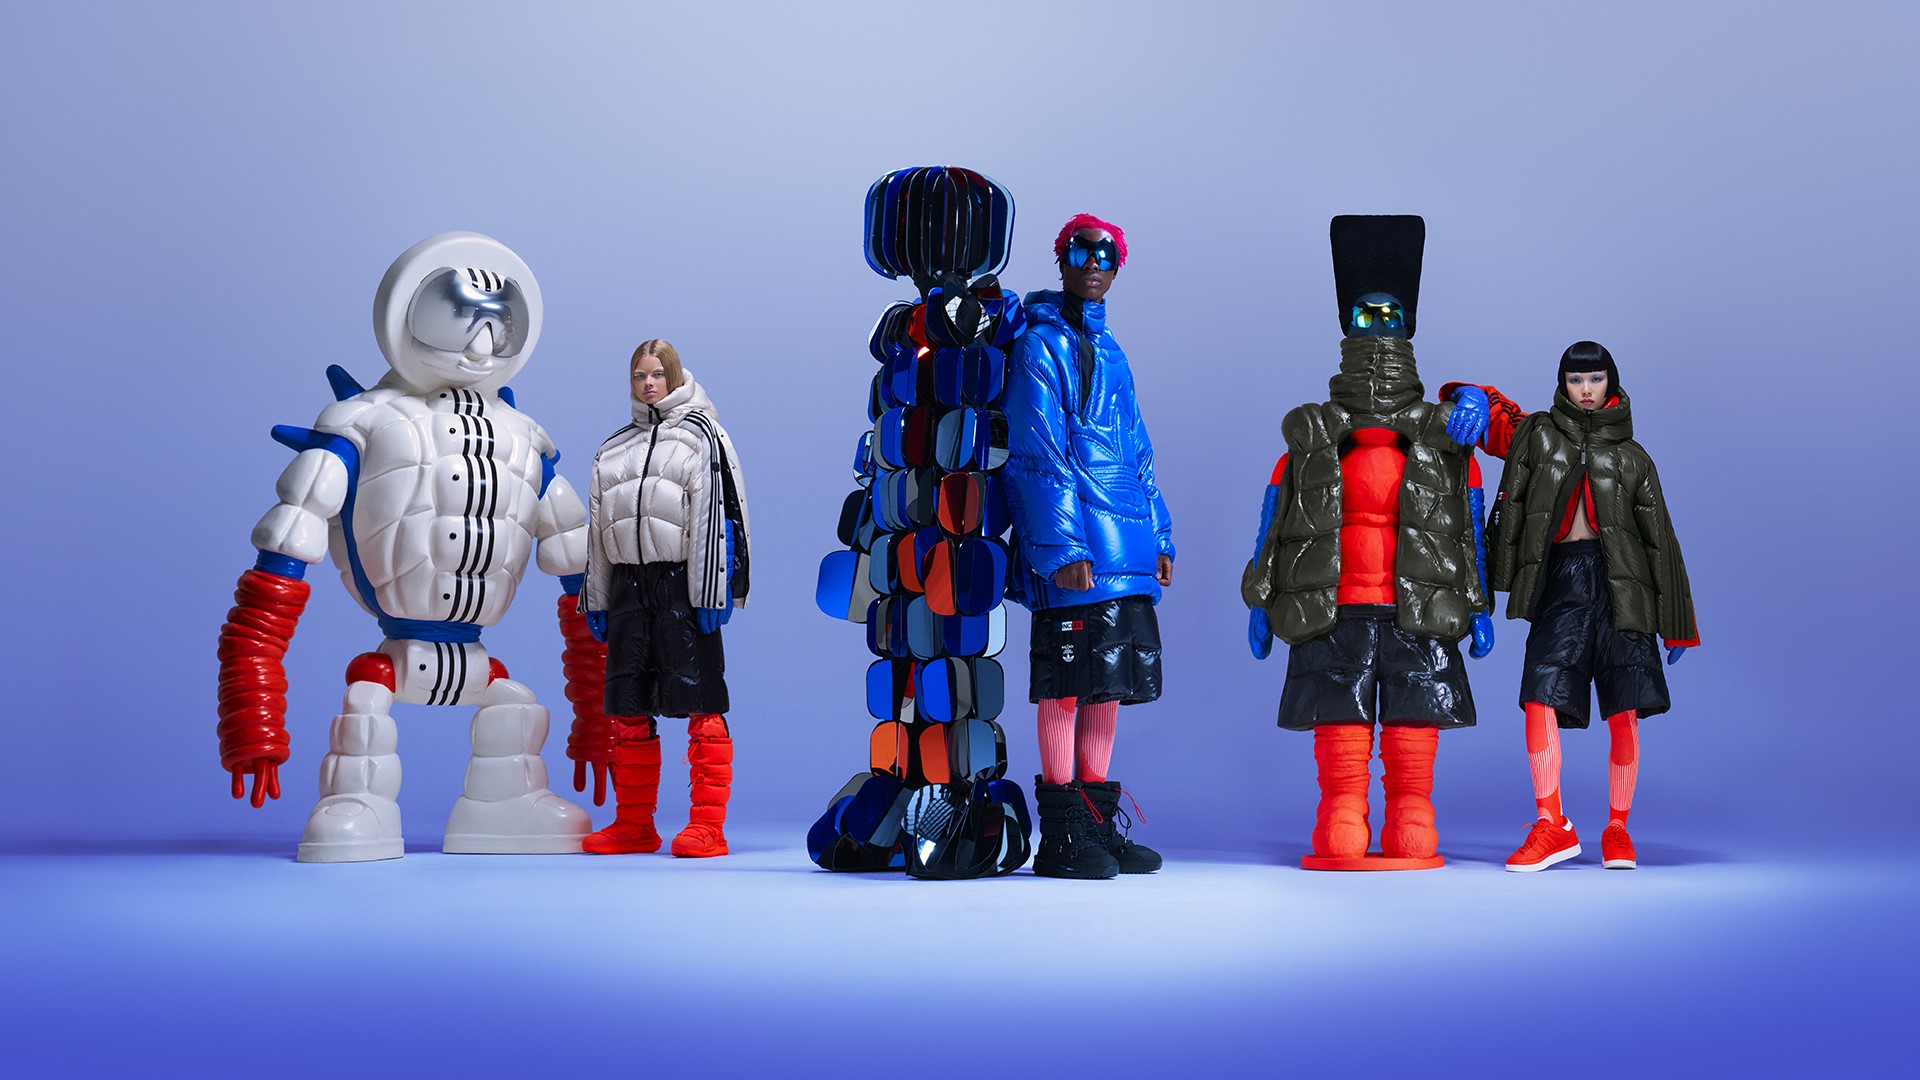 Mountain codes in the new Moncler Grenoble collection